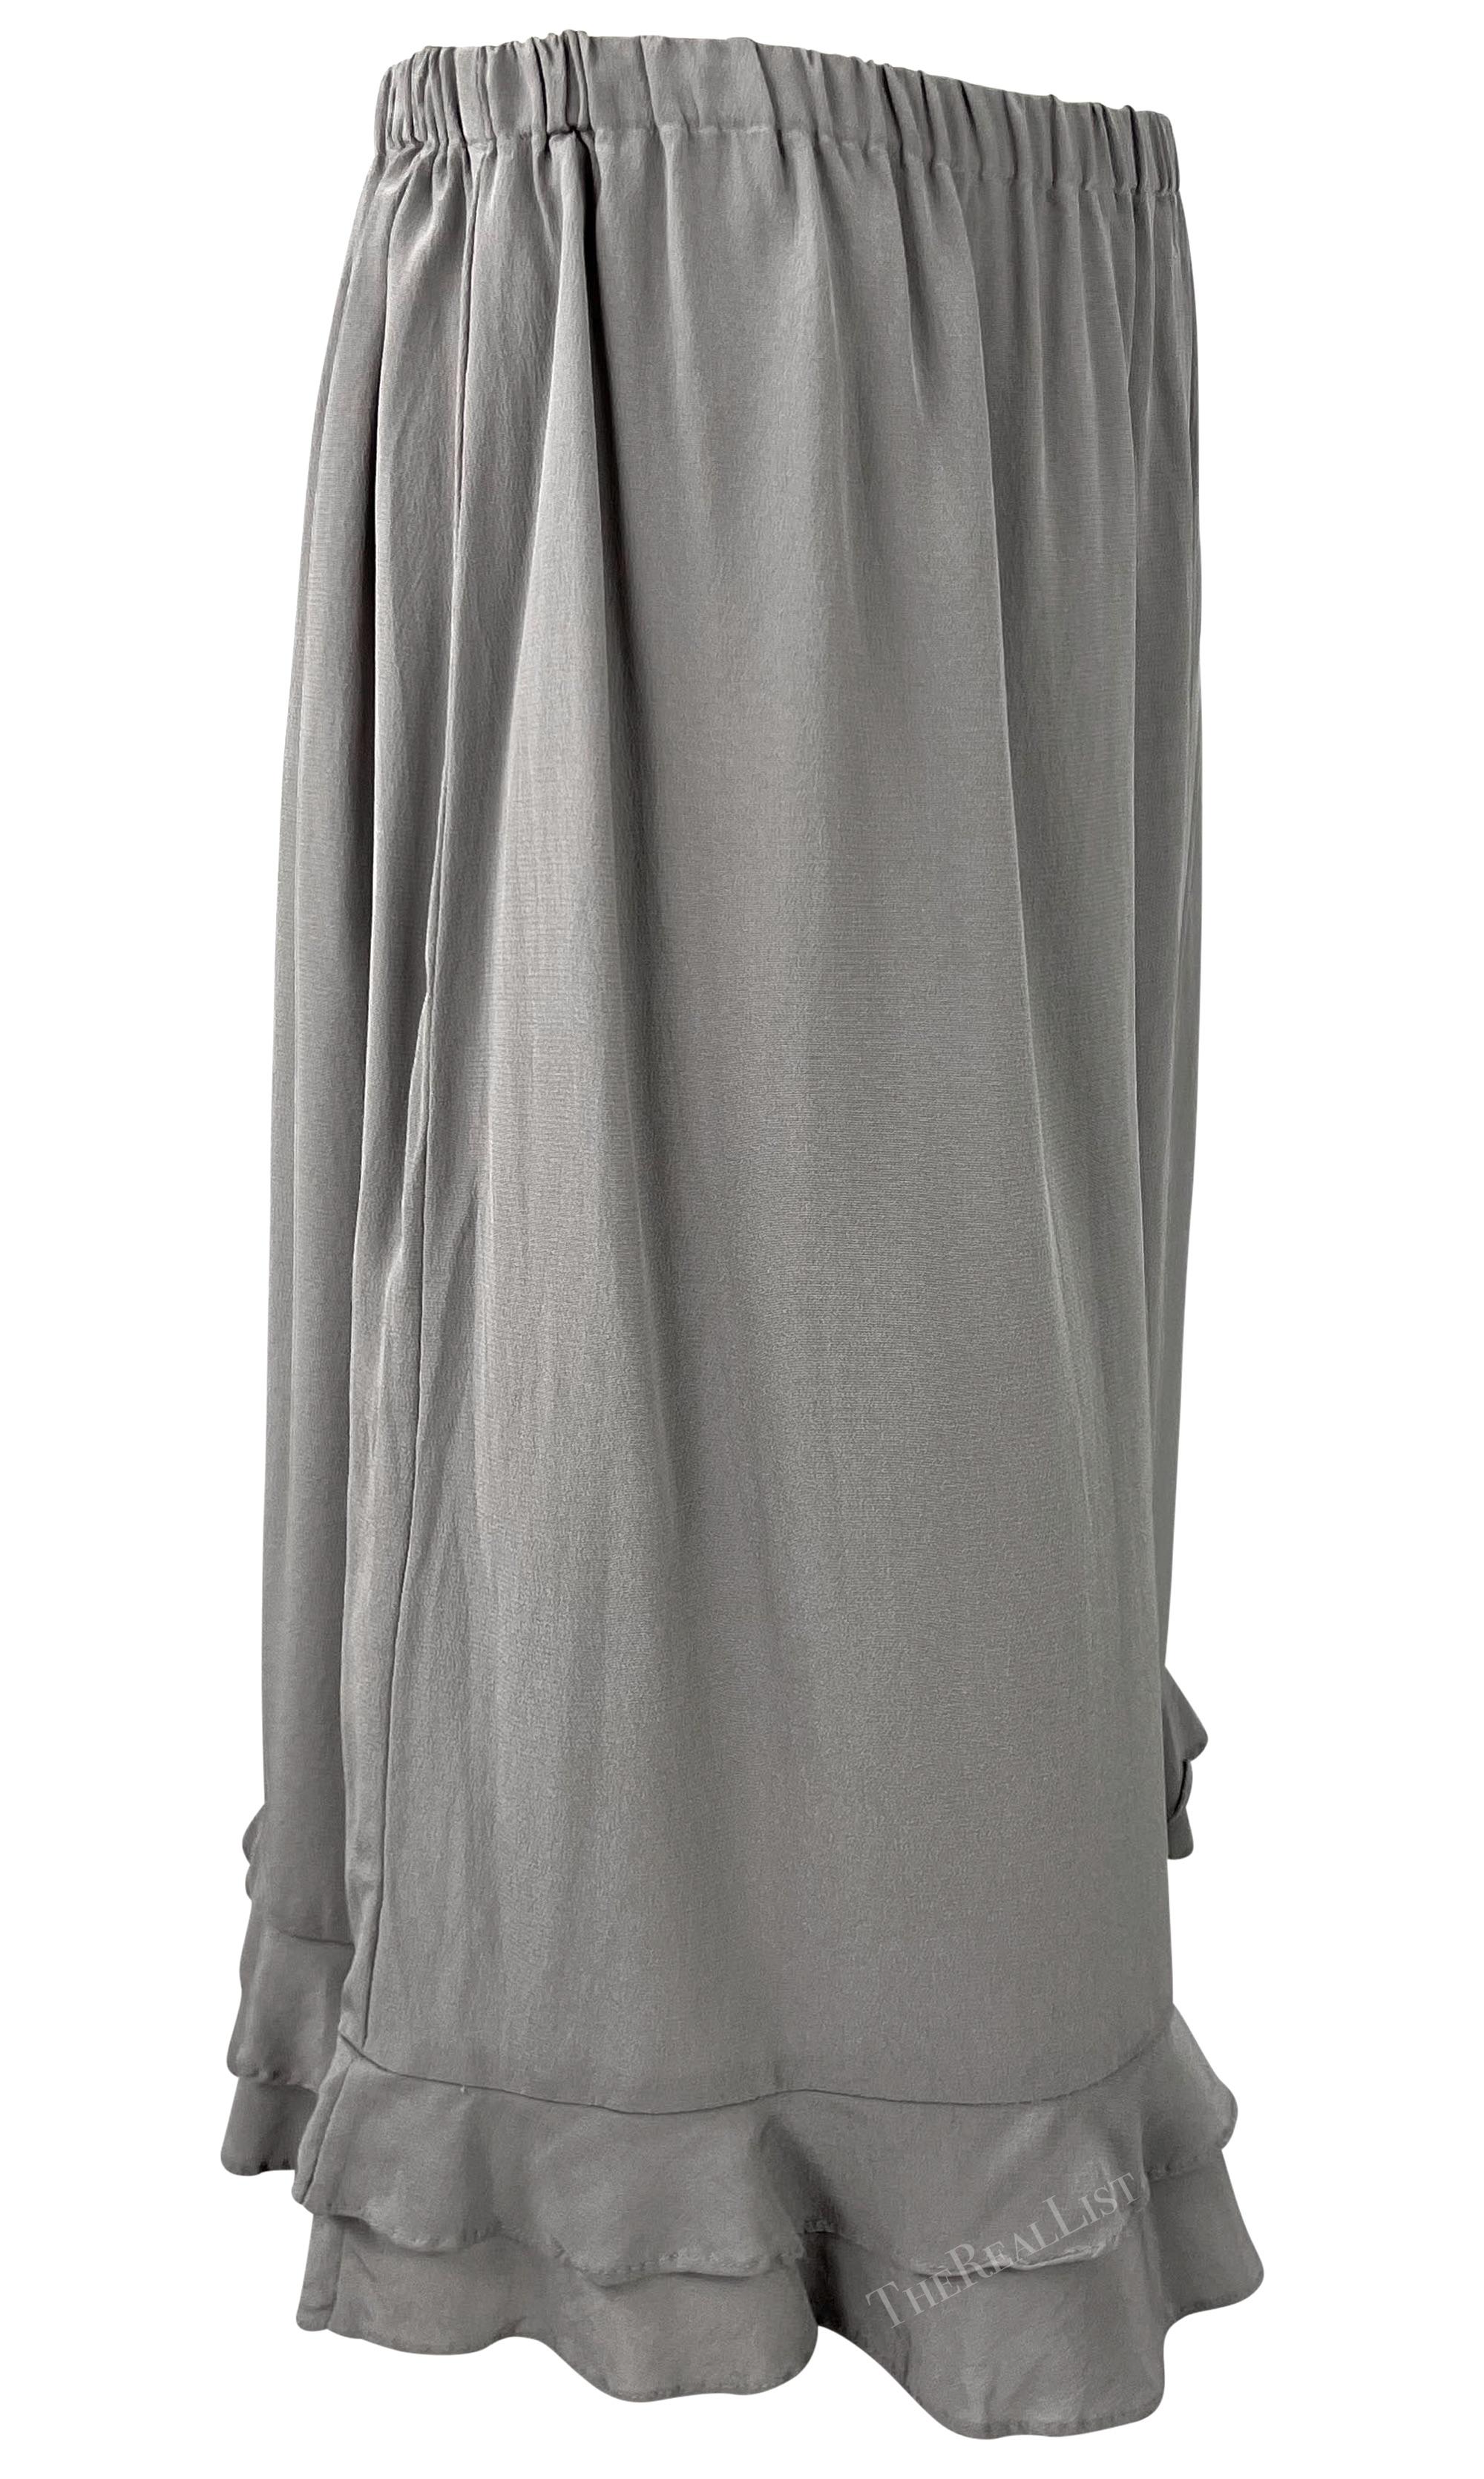 S/S 1999 Gucci by Tom Ford Ruffled Grey Silk Long Sleeve Top Skirt Set For Sale 8